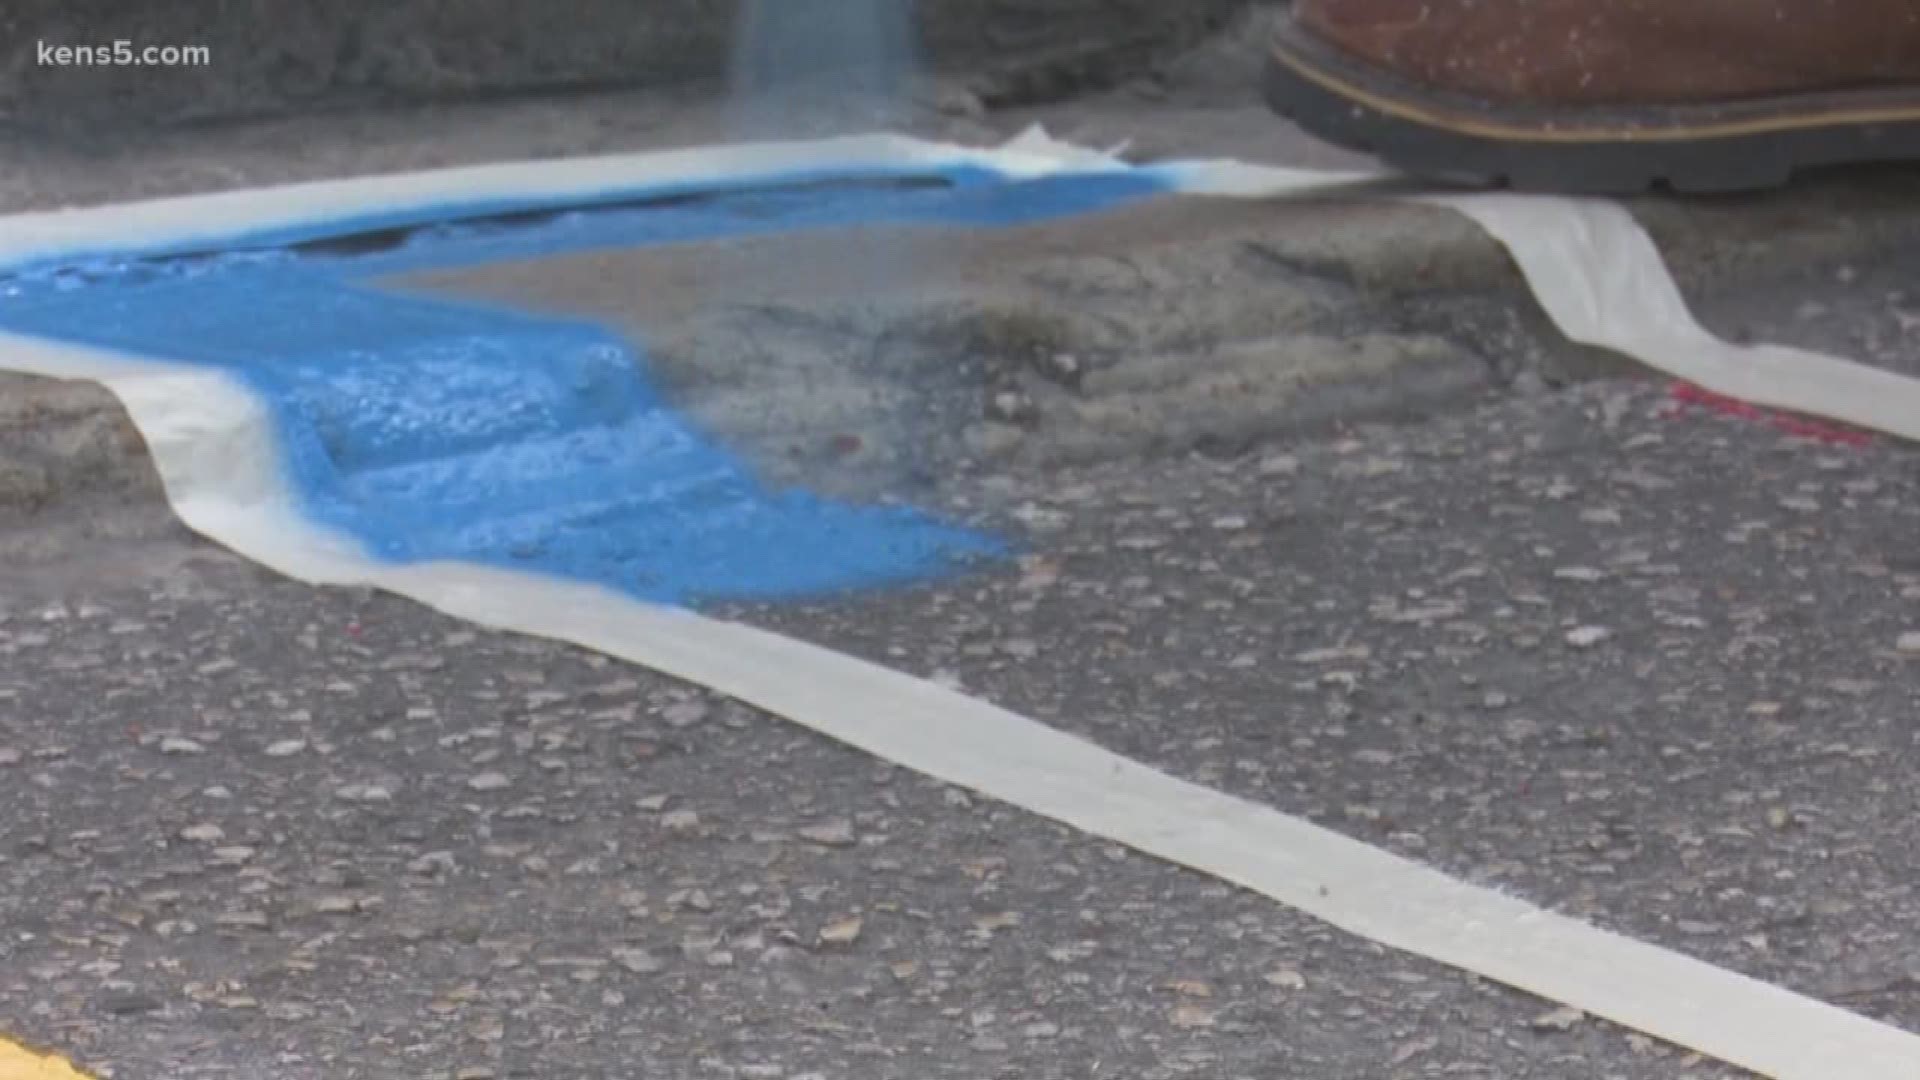 Pride and tolerance won out in Tobin Hill. Despite the critics and controversy, a colorful new crosswalk will soon welcome pedestrians south of downtown. Eyewitness news reporter Adi Guajardo joins us live.